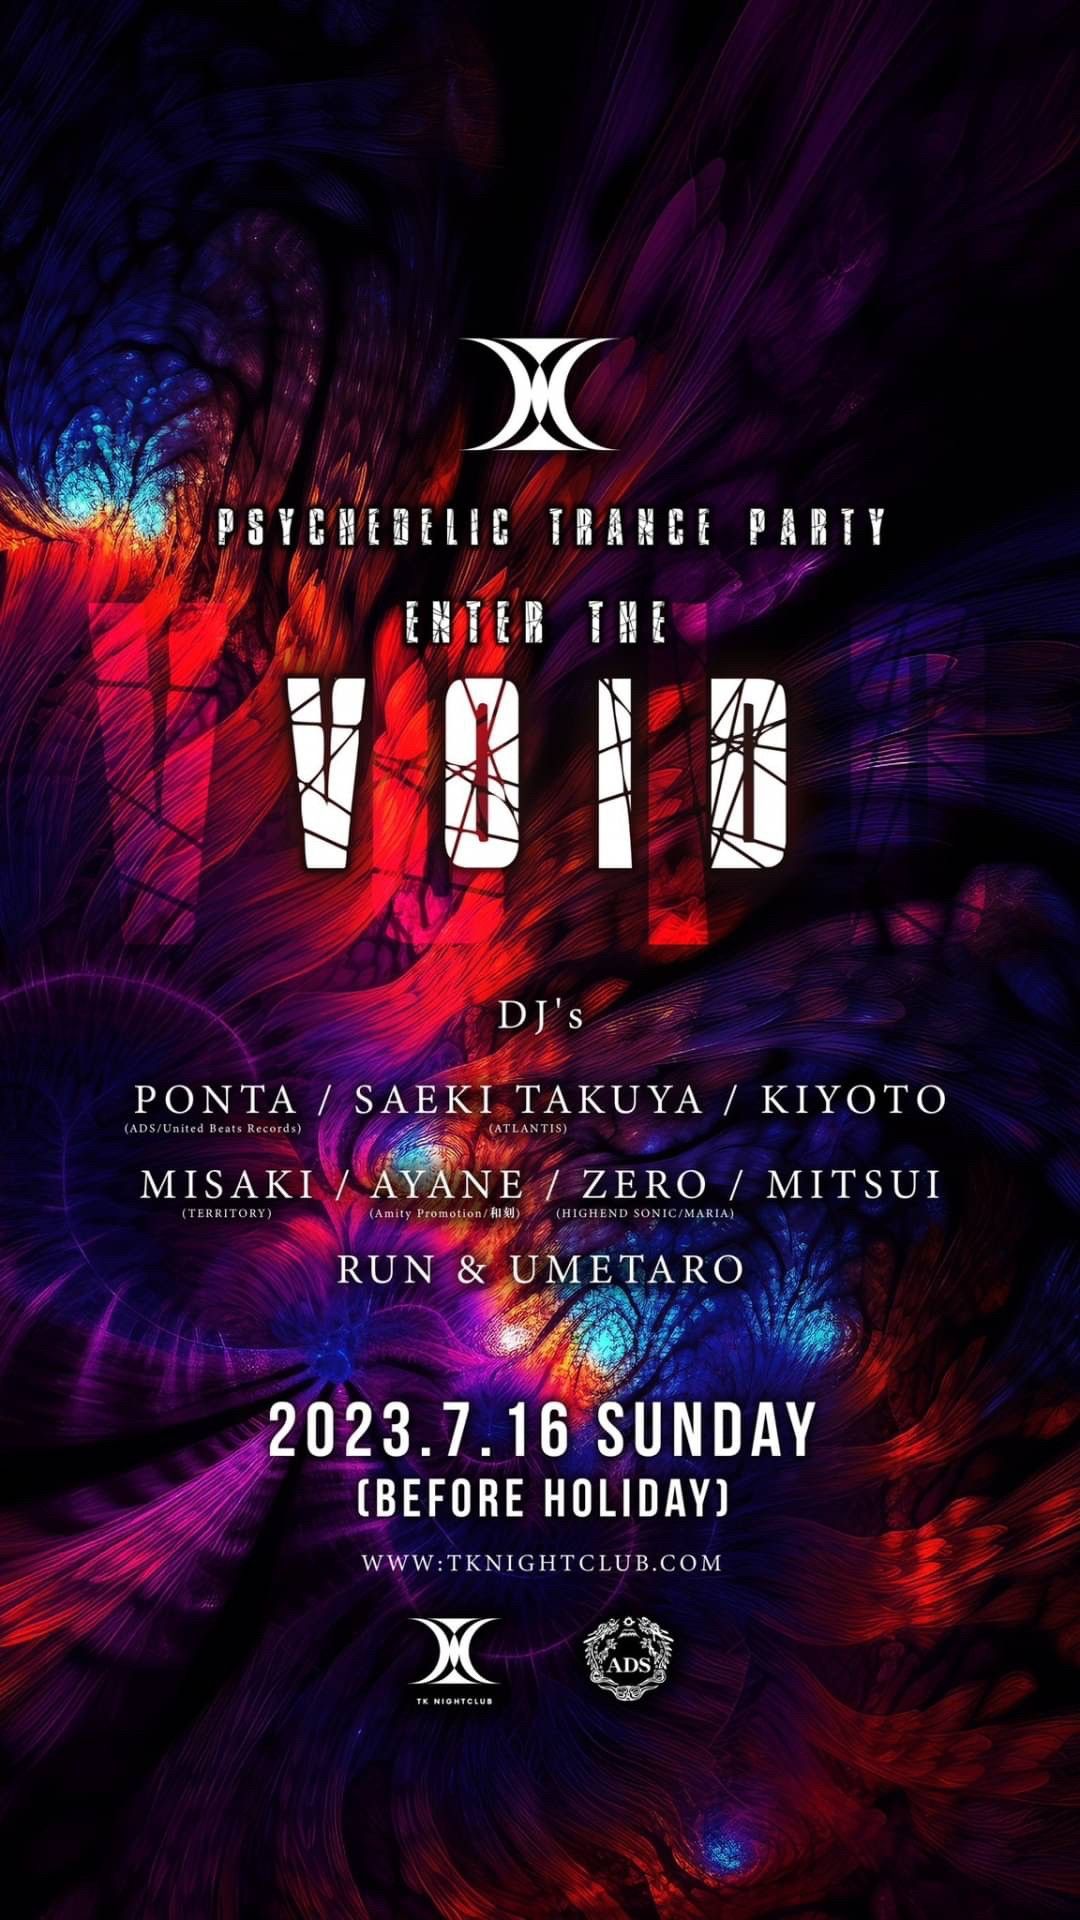 TKNC×ADS ALL PSYTRANCE PARTY Enter The -VOID-